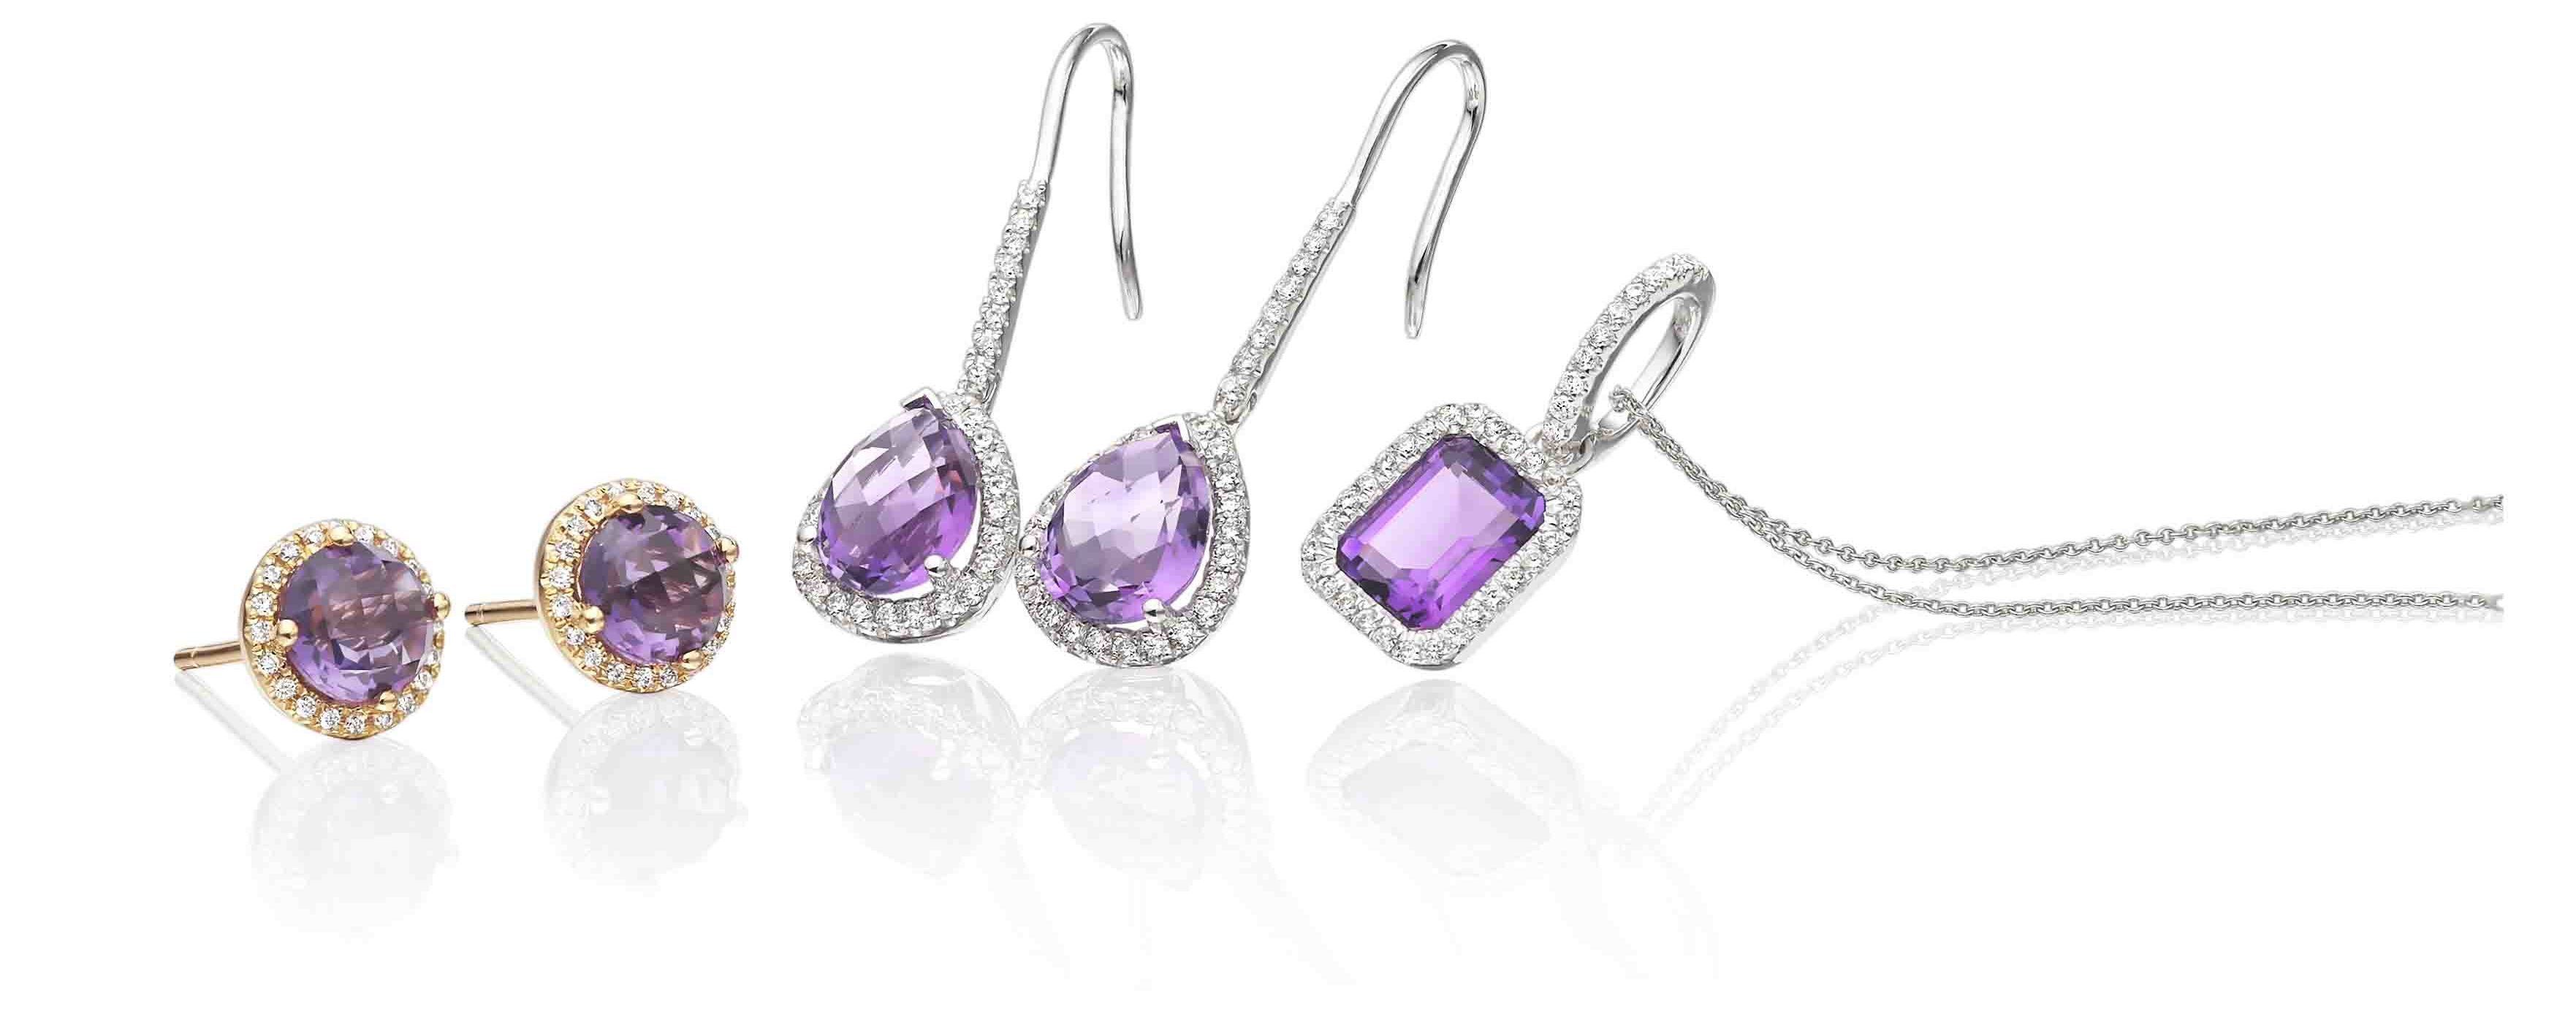 Amethyst earrings made from white and yellow gold and necklace made from white gold